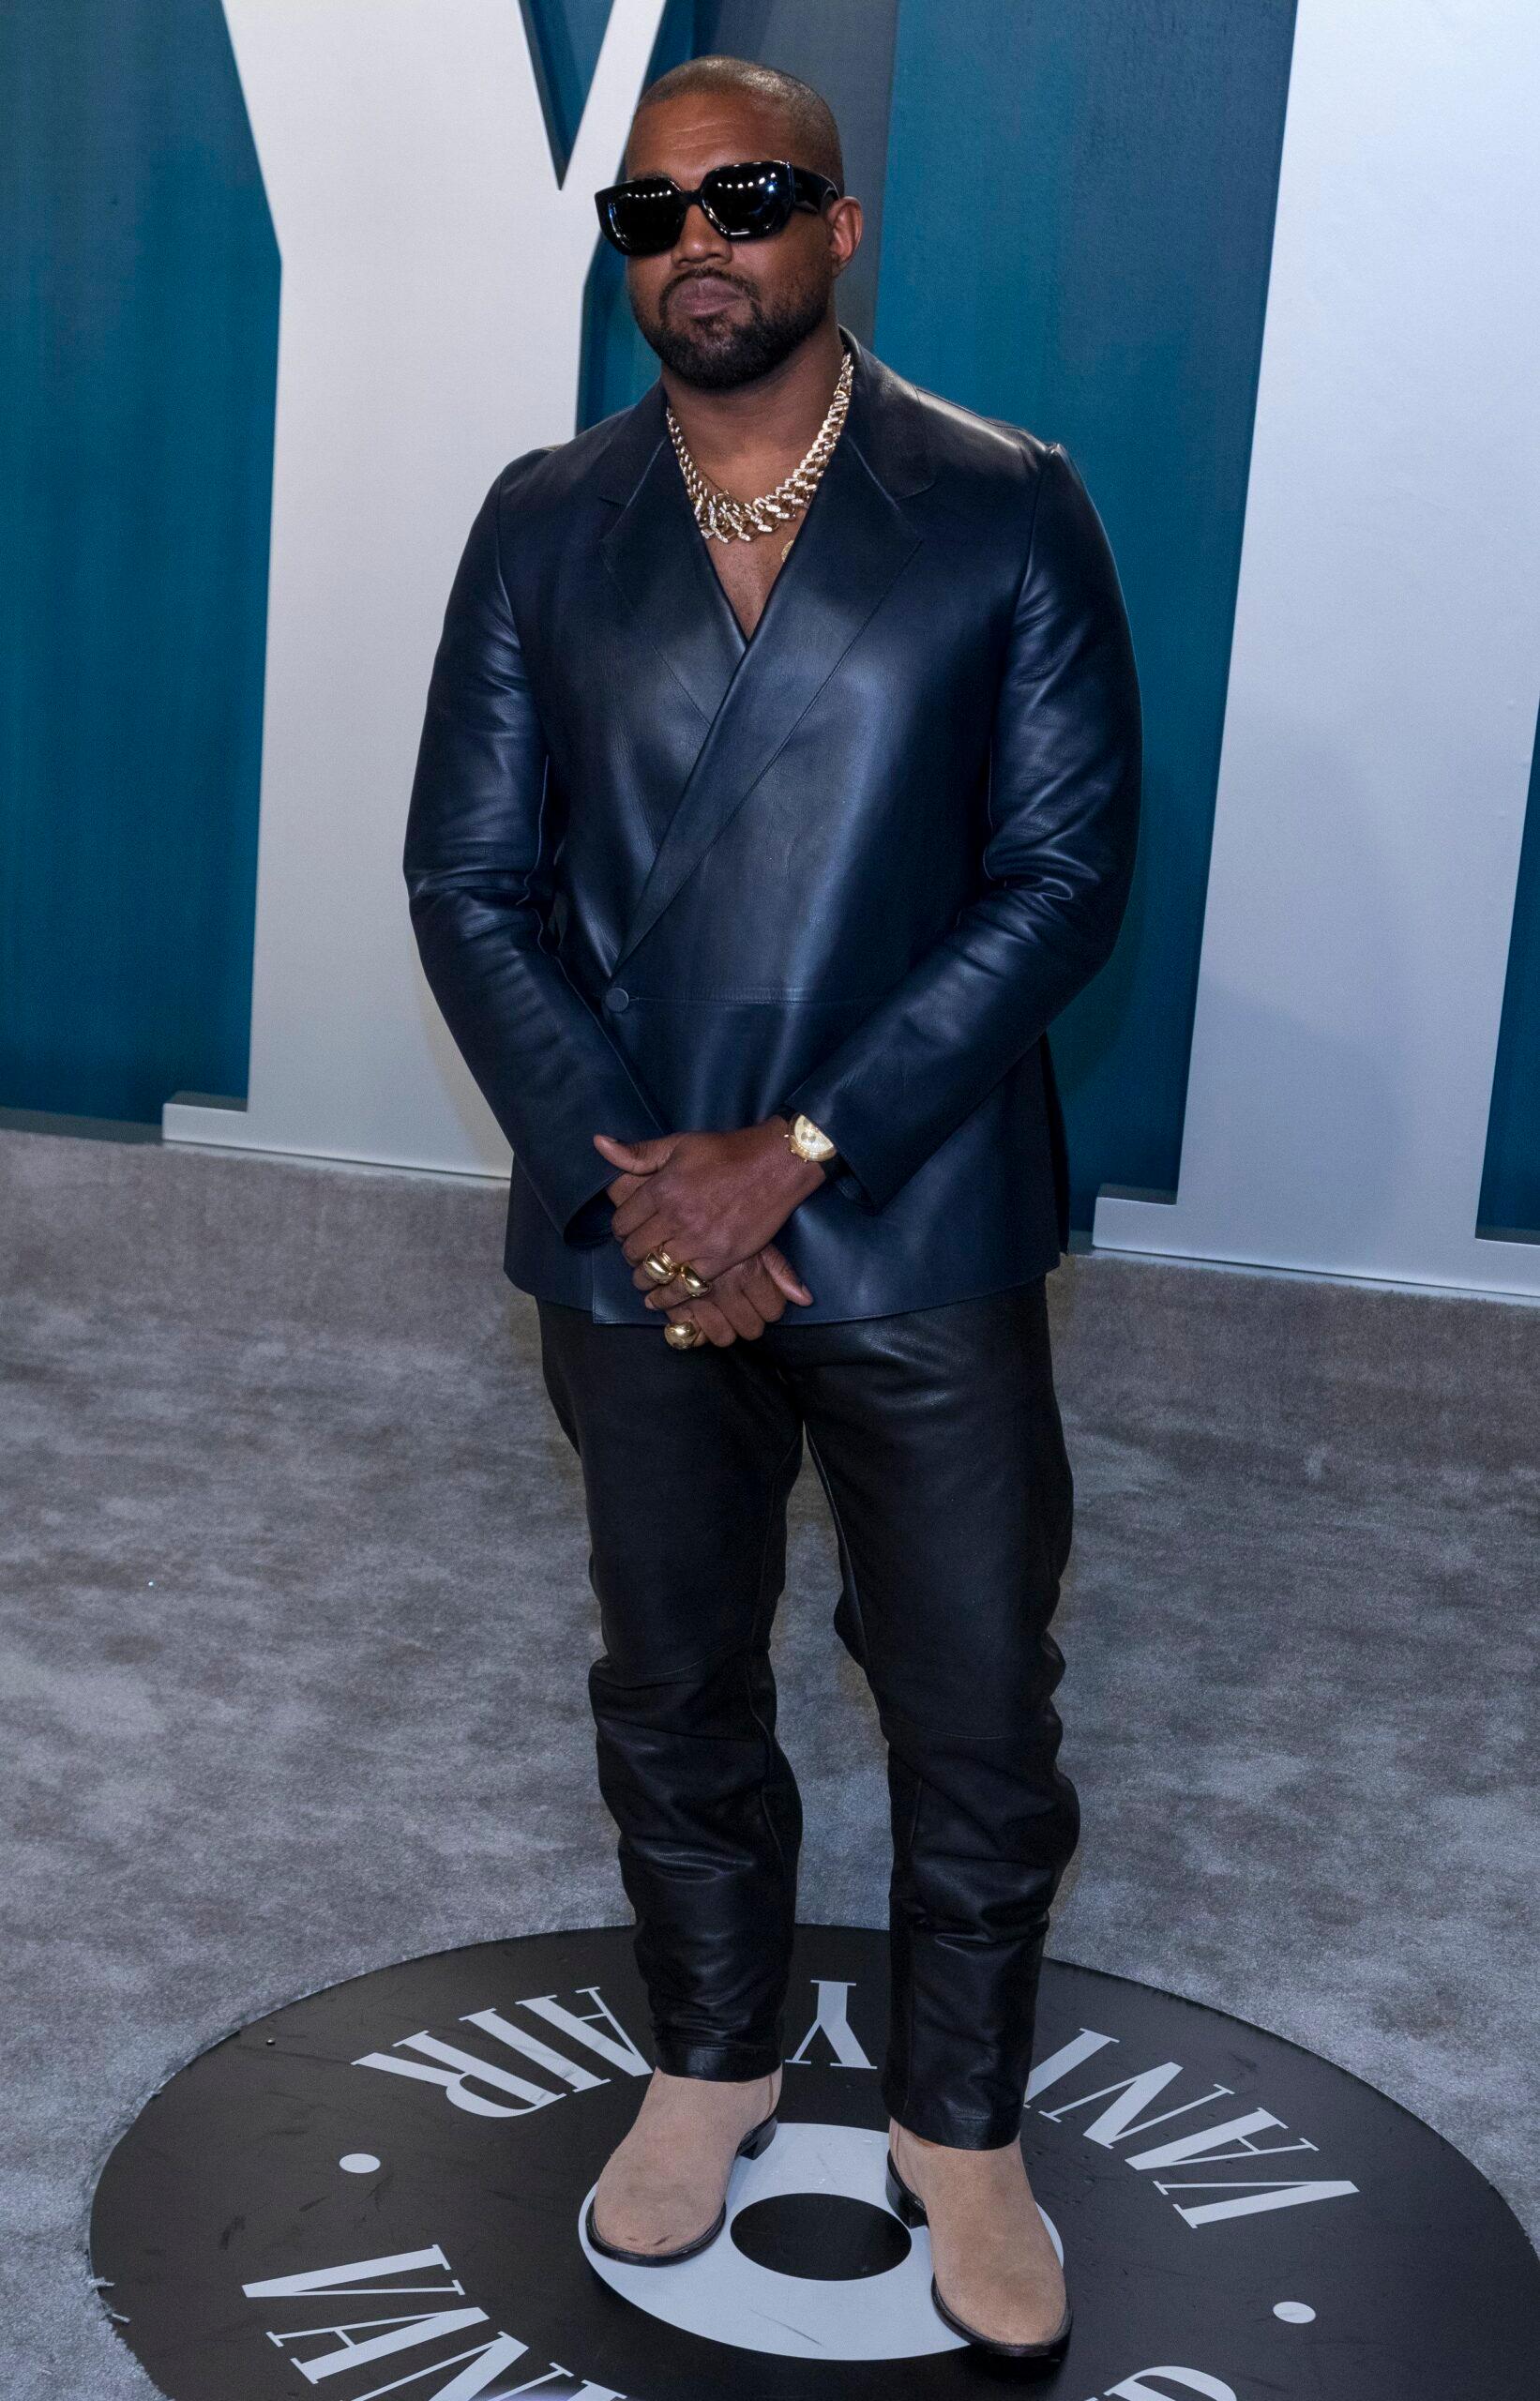 Kanye West arrives at the Vanity Fair Oscar Party in Los Angeles, USA - February 9, 2020